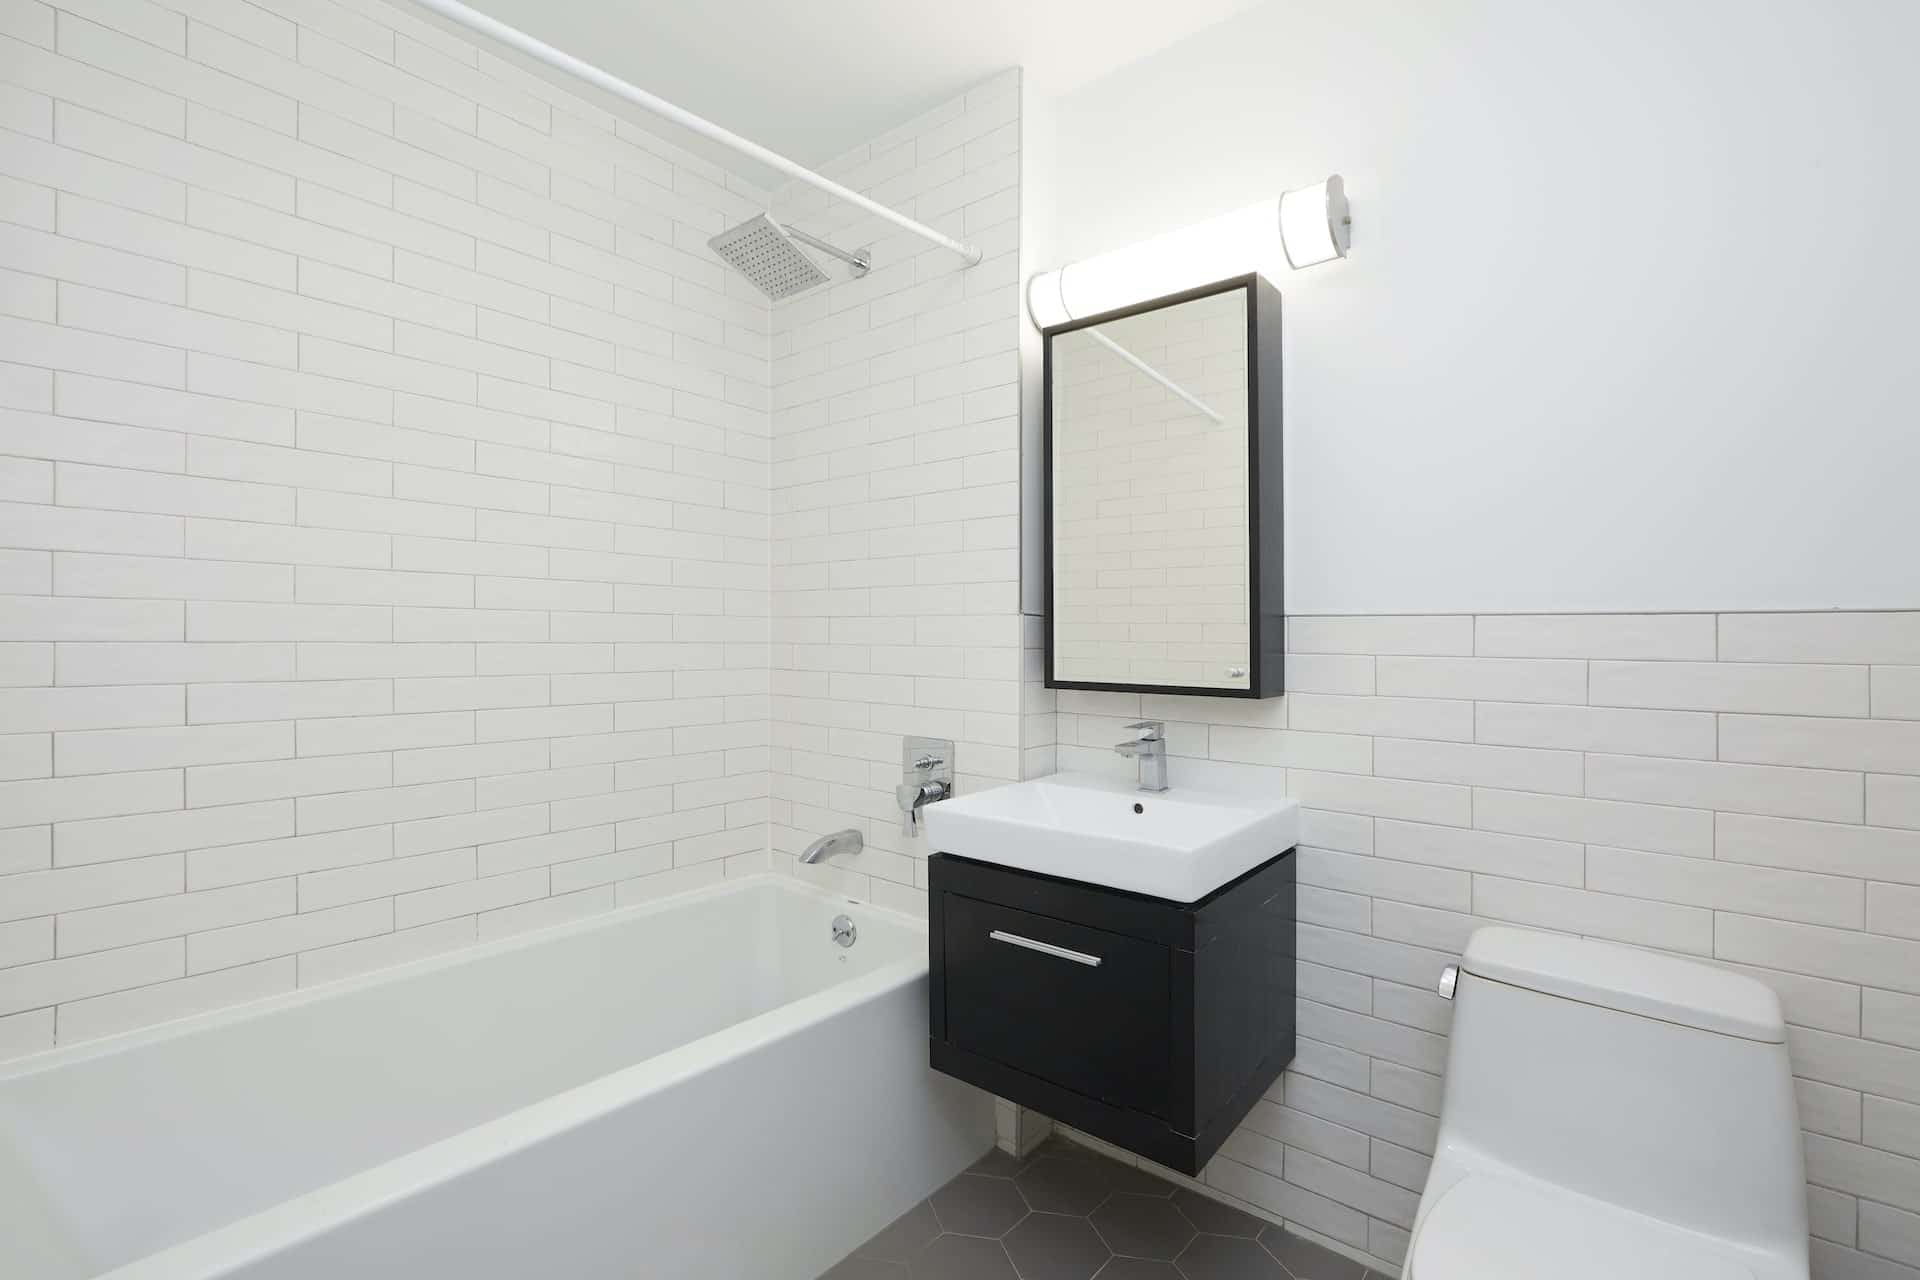 Bathroom at 83 Bushwick Place apartments with single vanity, a mirror, tile walls & floor, and a soaking tub with shower.